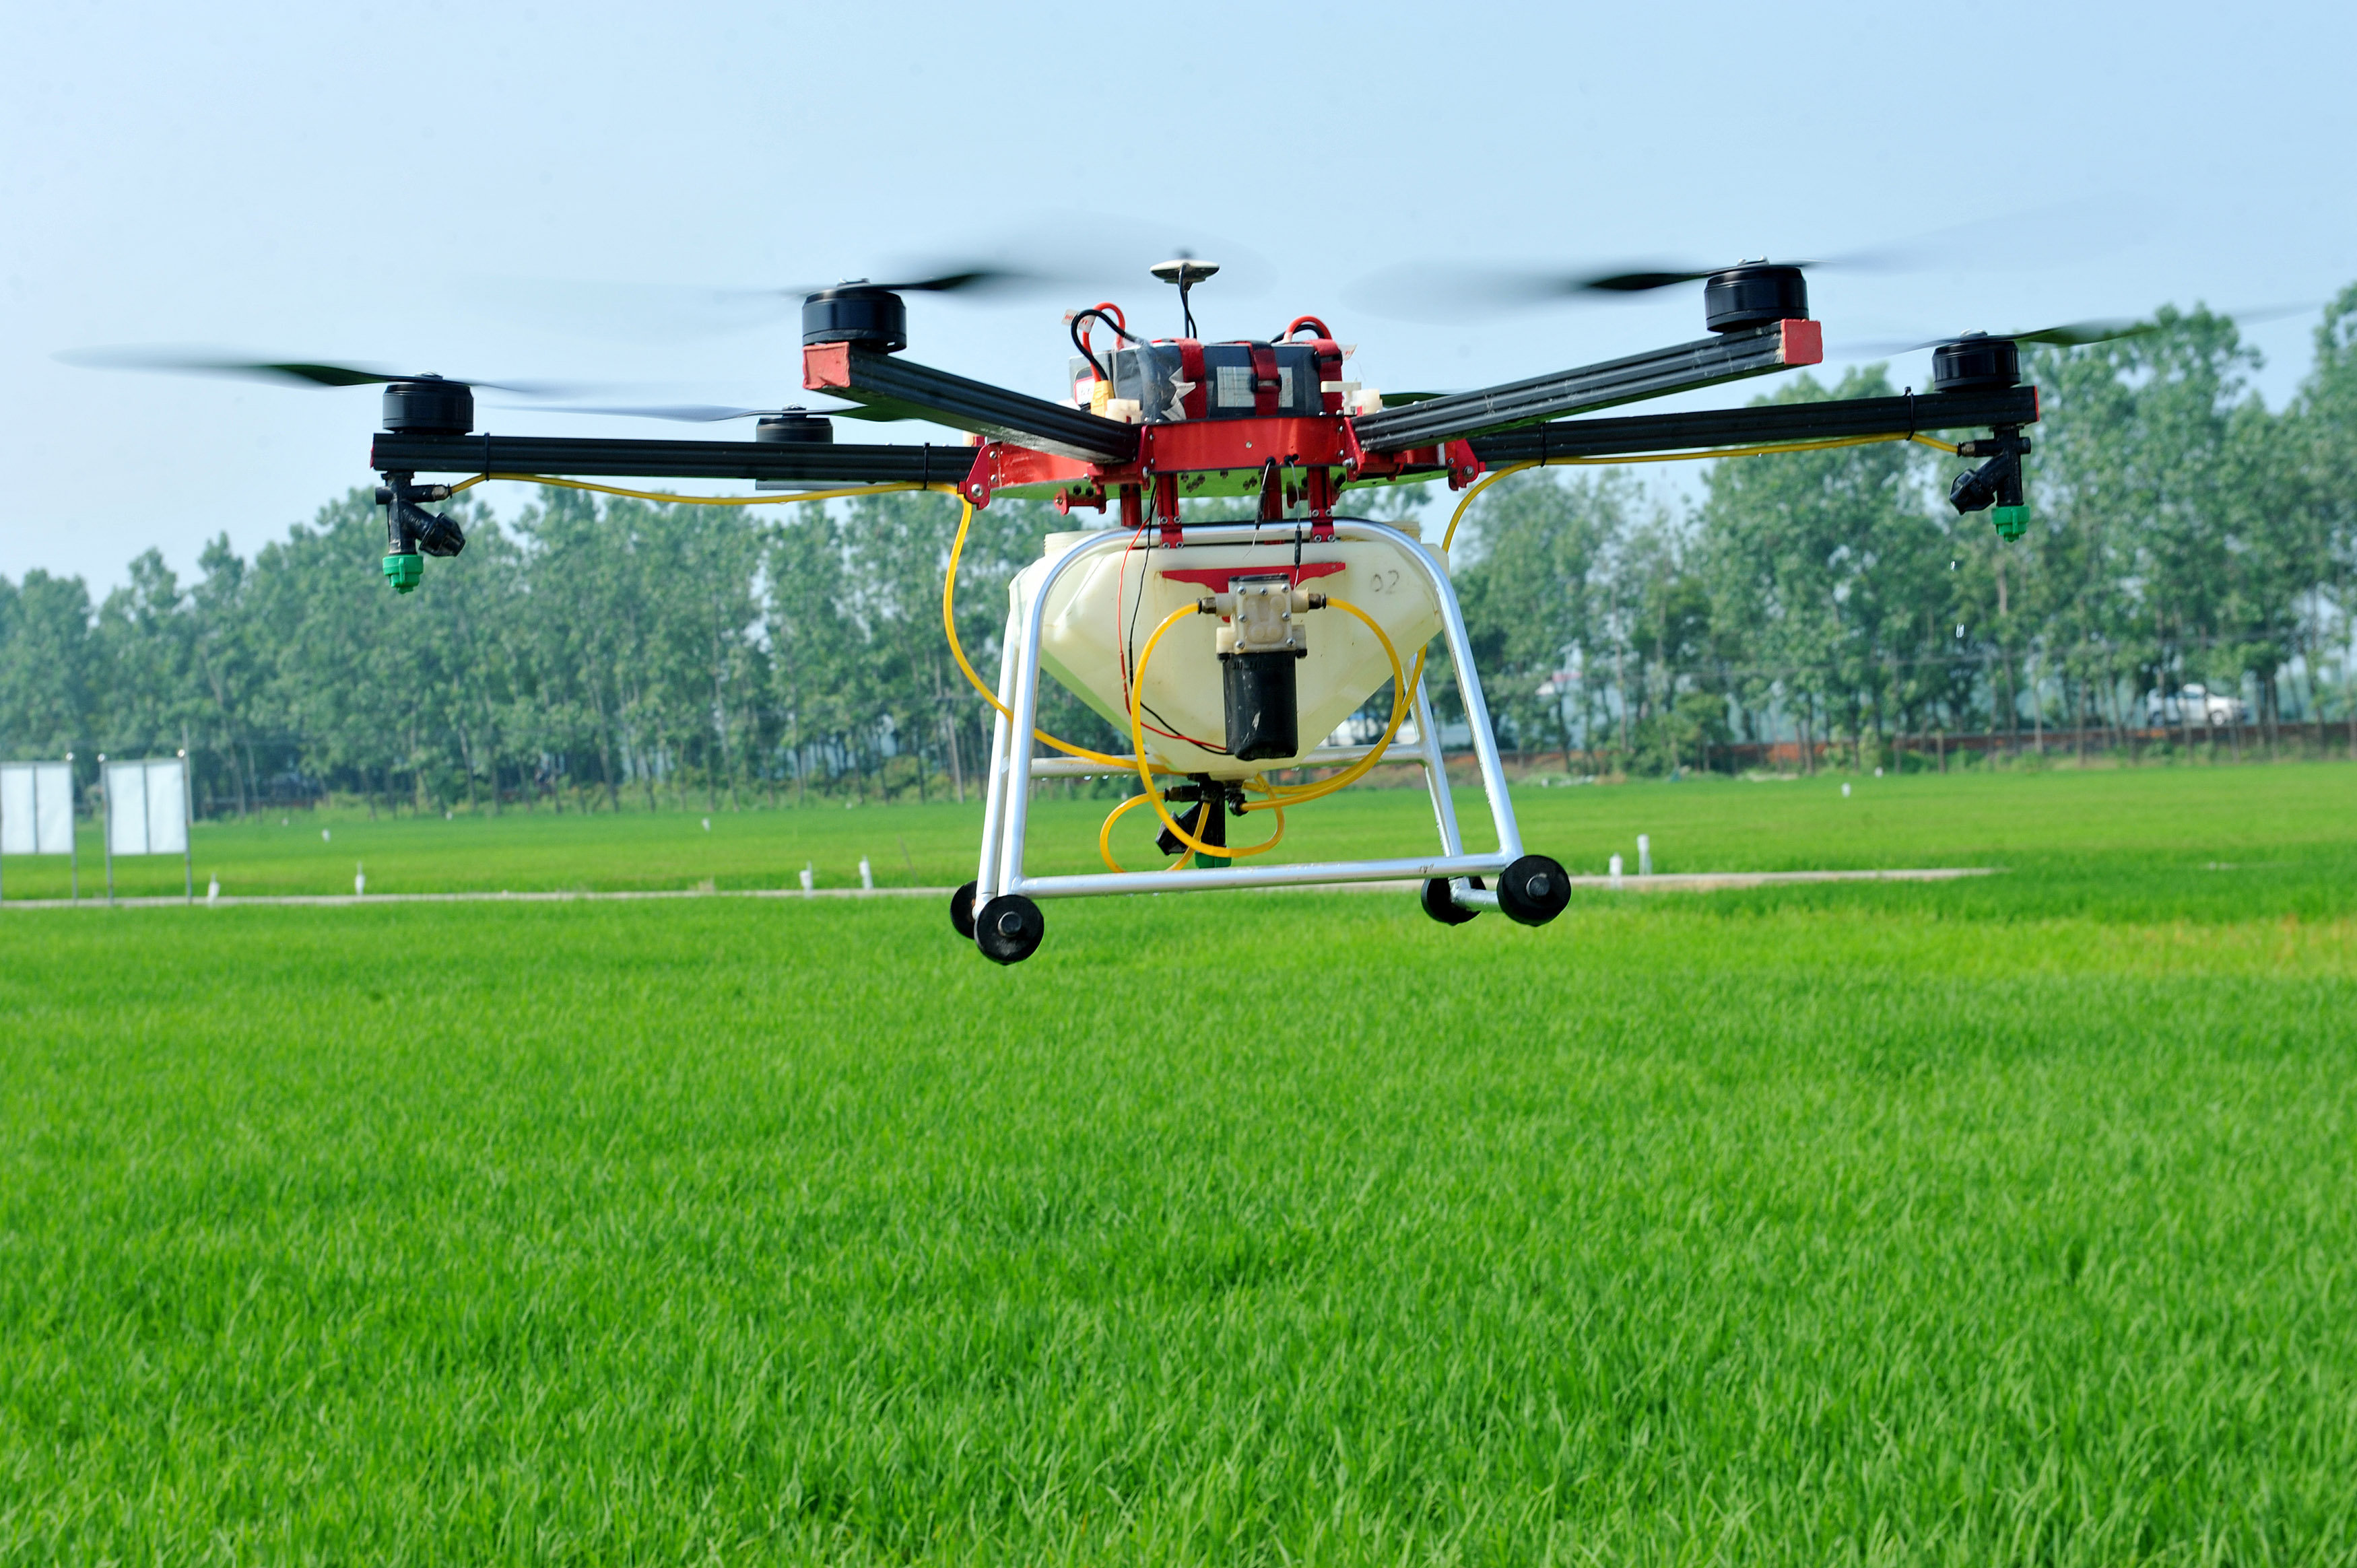 Drones have been used across all industries from policing to this agricultural drone that can spray pesticide on crops.